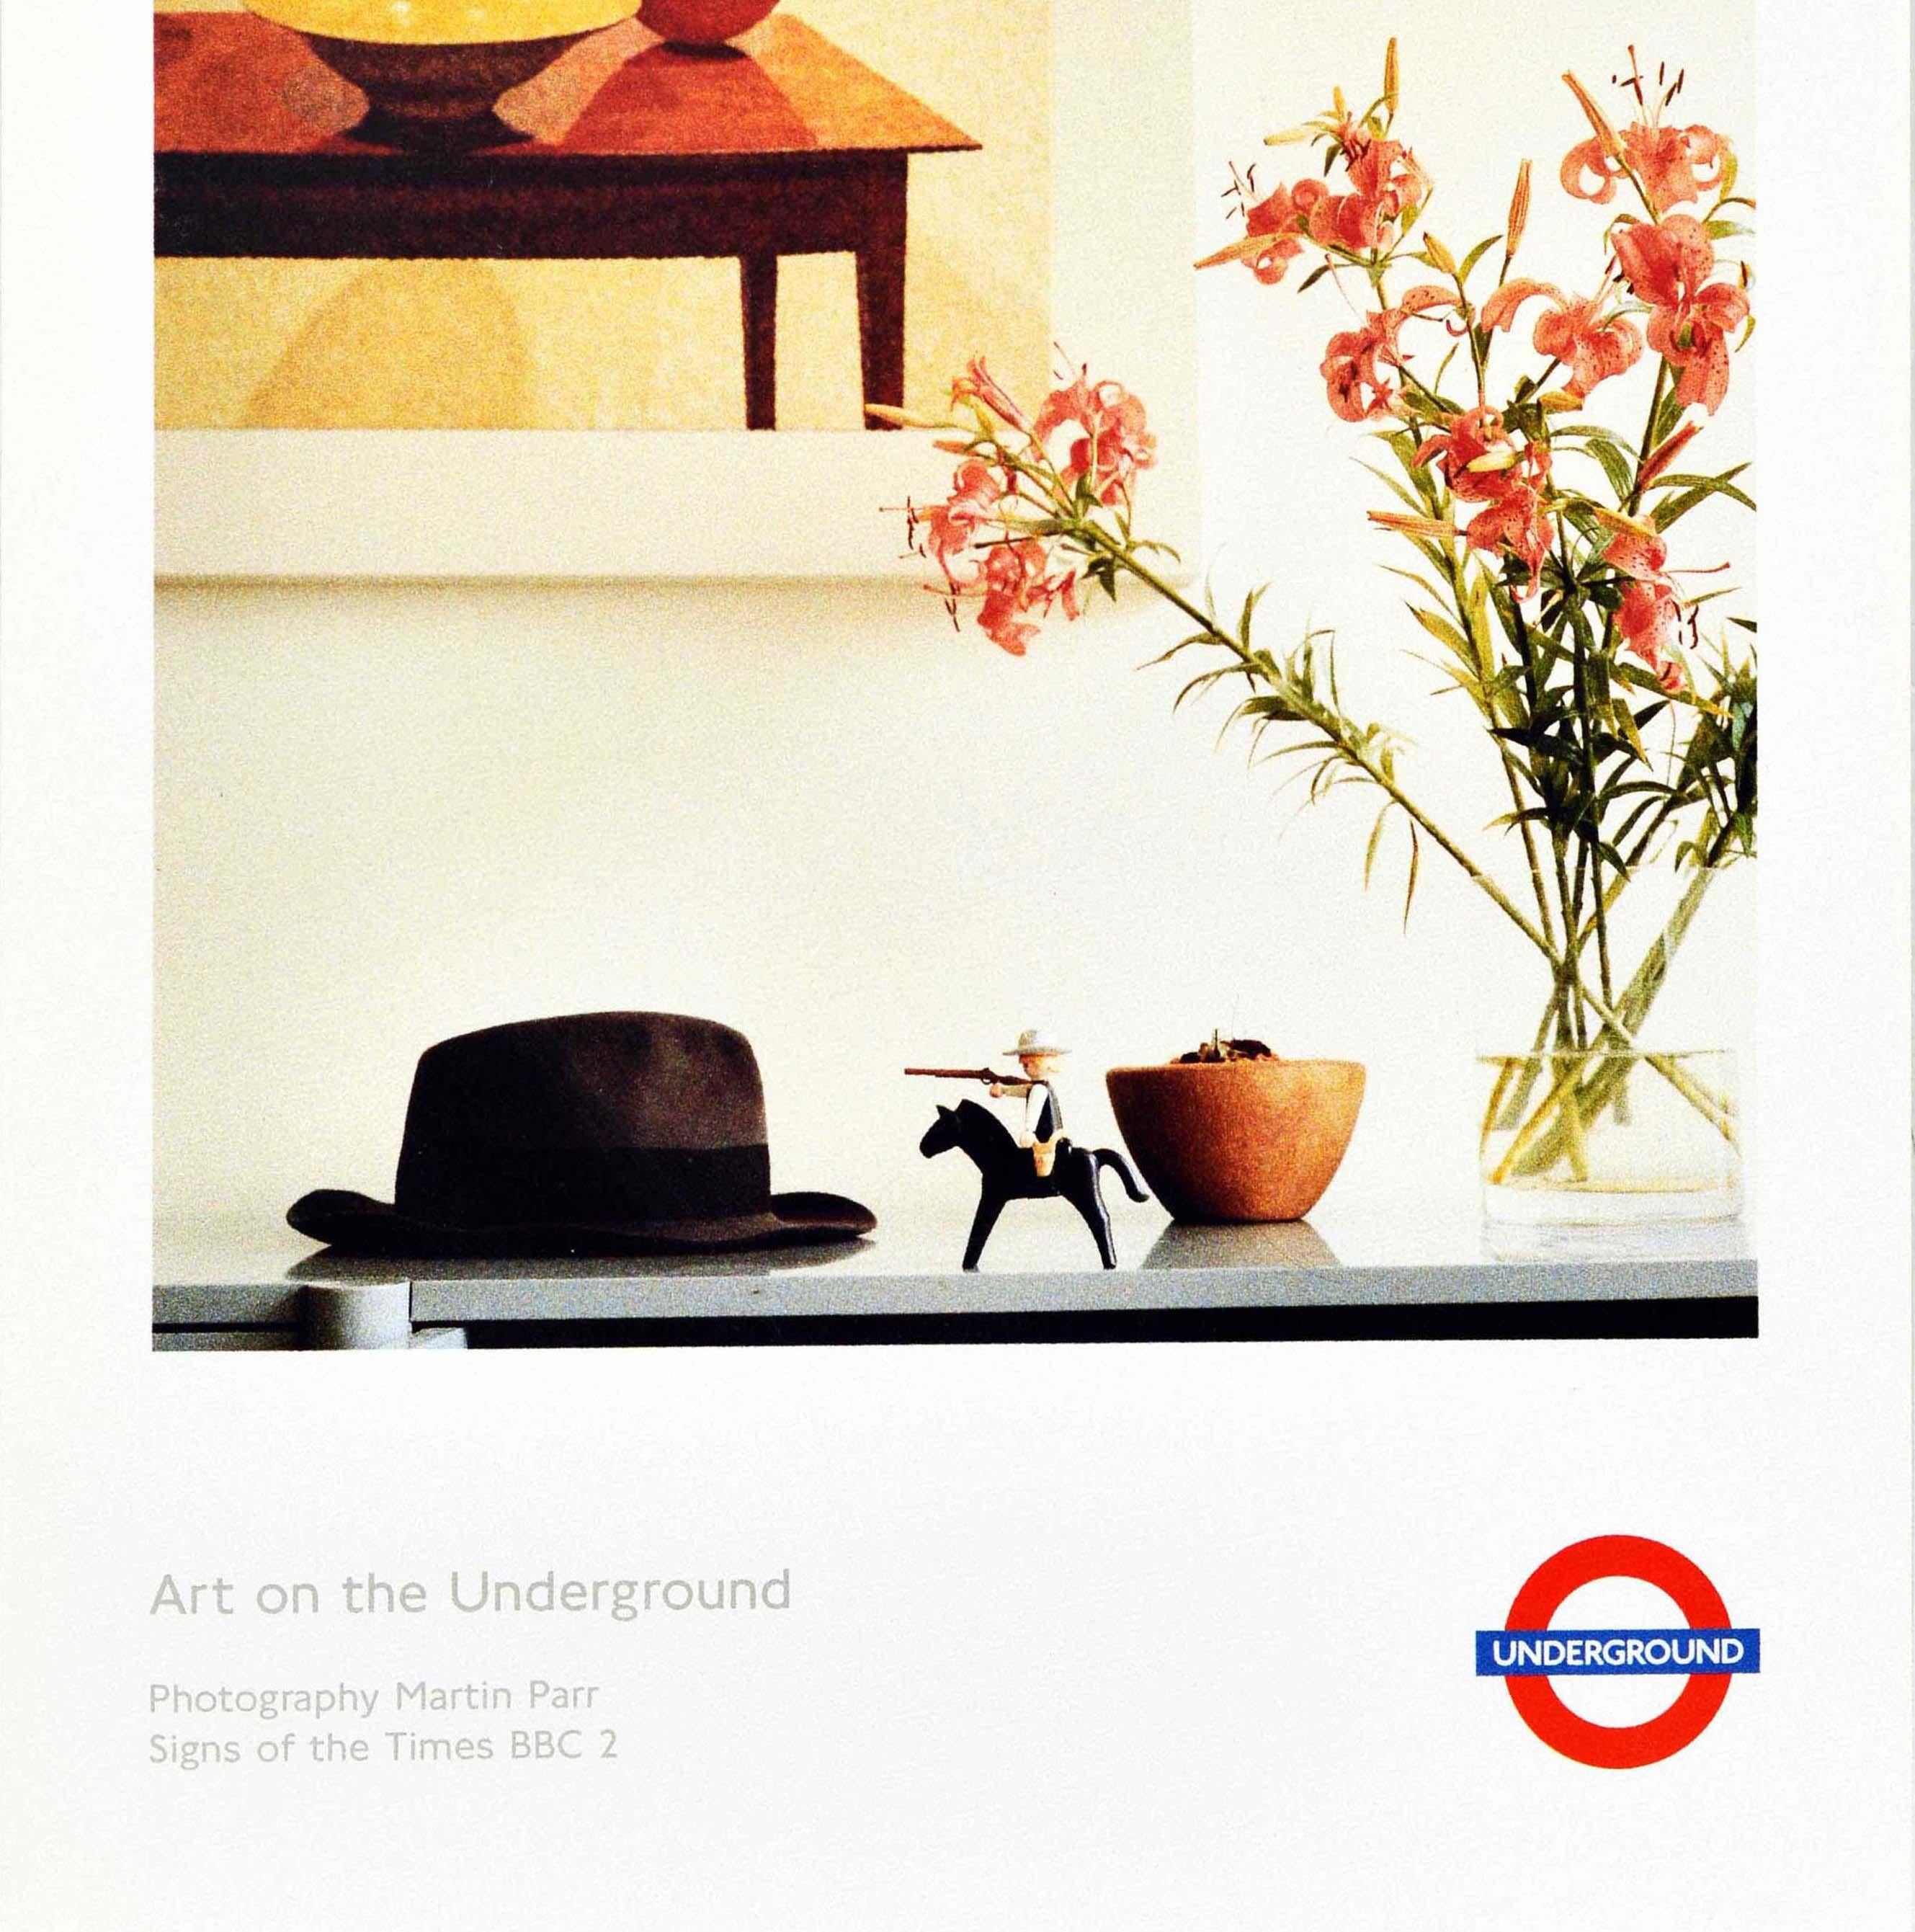 Original vintage London Underground poster featuring a side table with a hat and flowers in a vase on it, a framed artwork on the wall and a child's toy horse with the rider holding a gun to the hat in front of a decorative bowl, the caption above